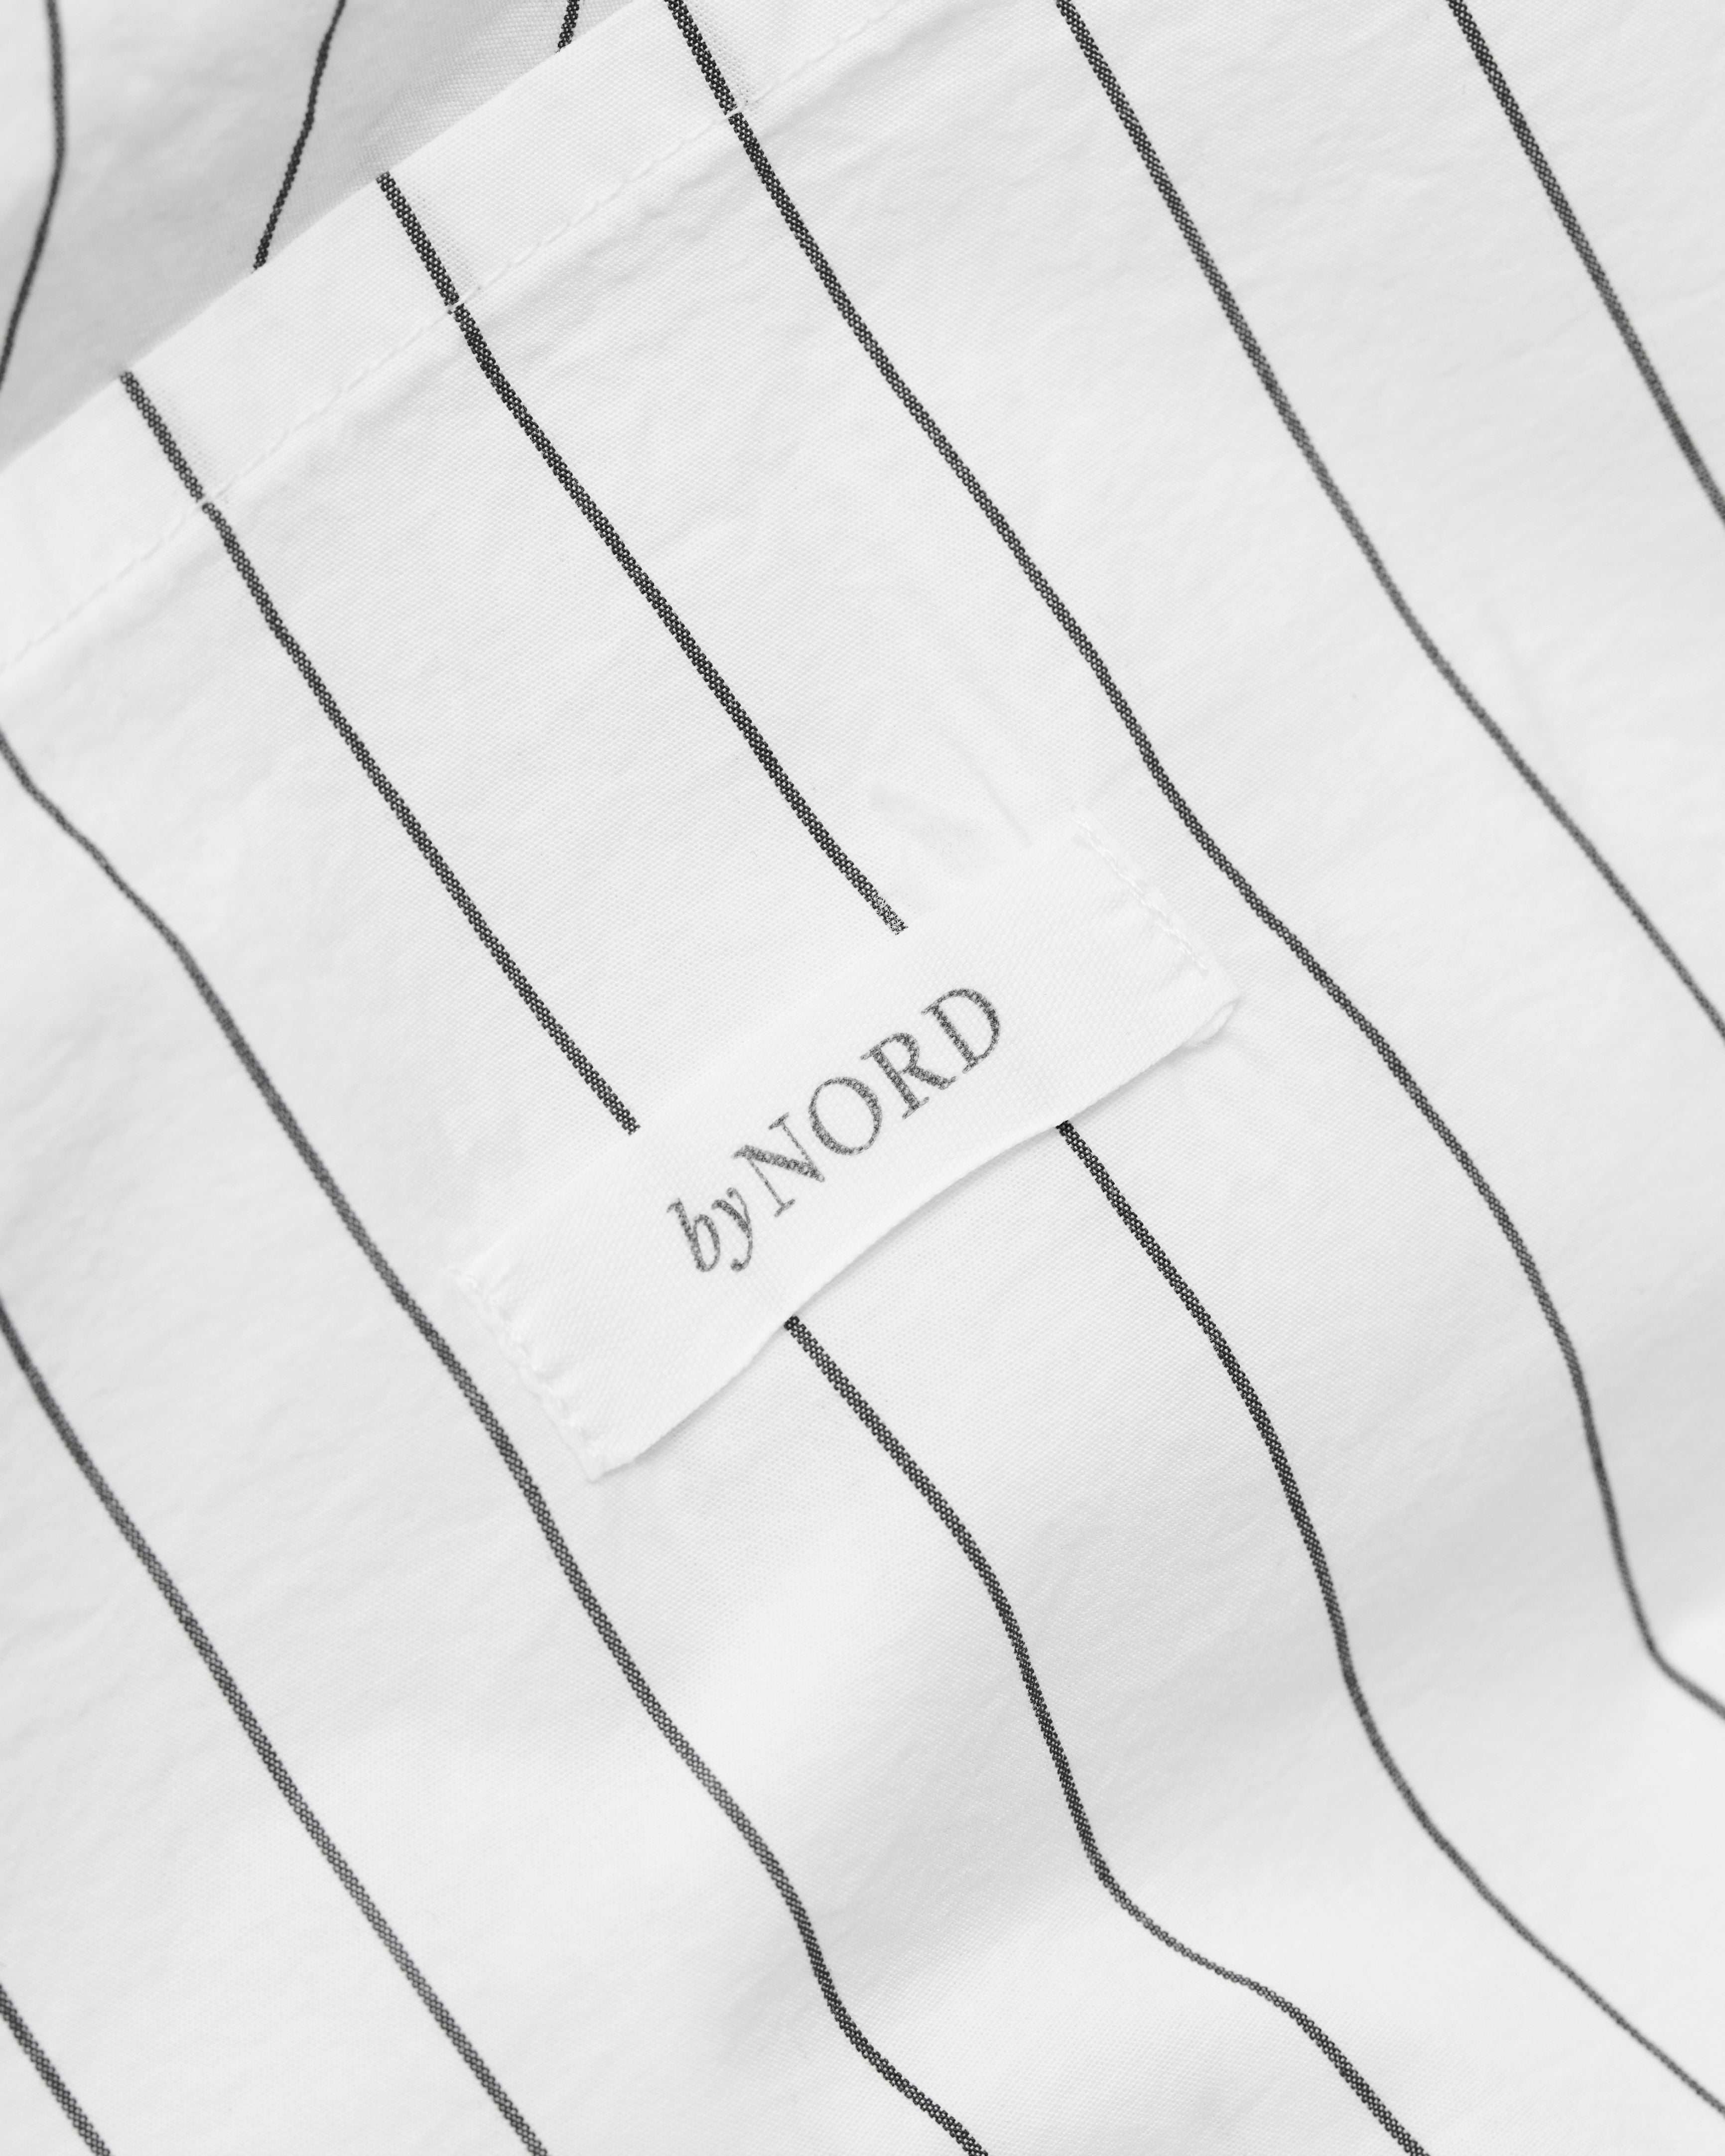 By Nord Dagny Bed Linen Set, Snow/Coal